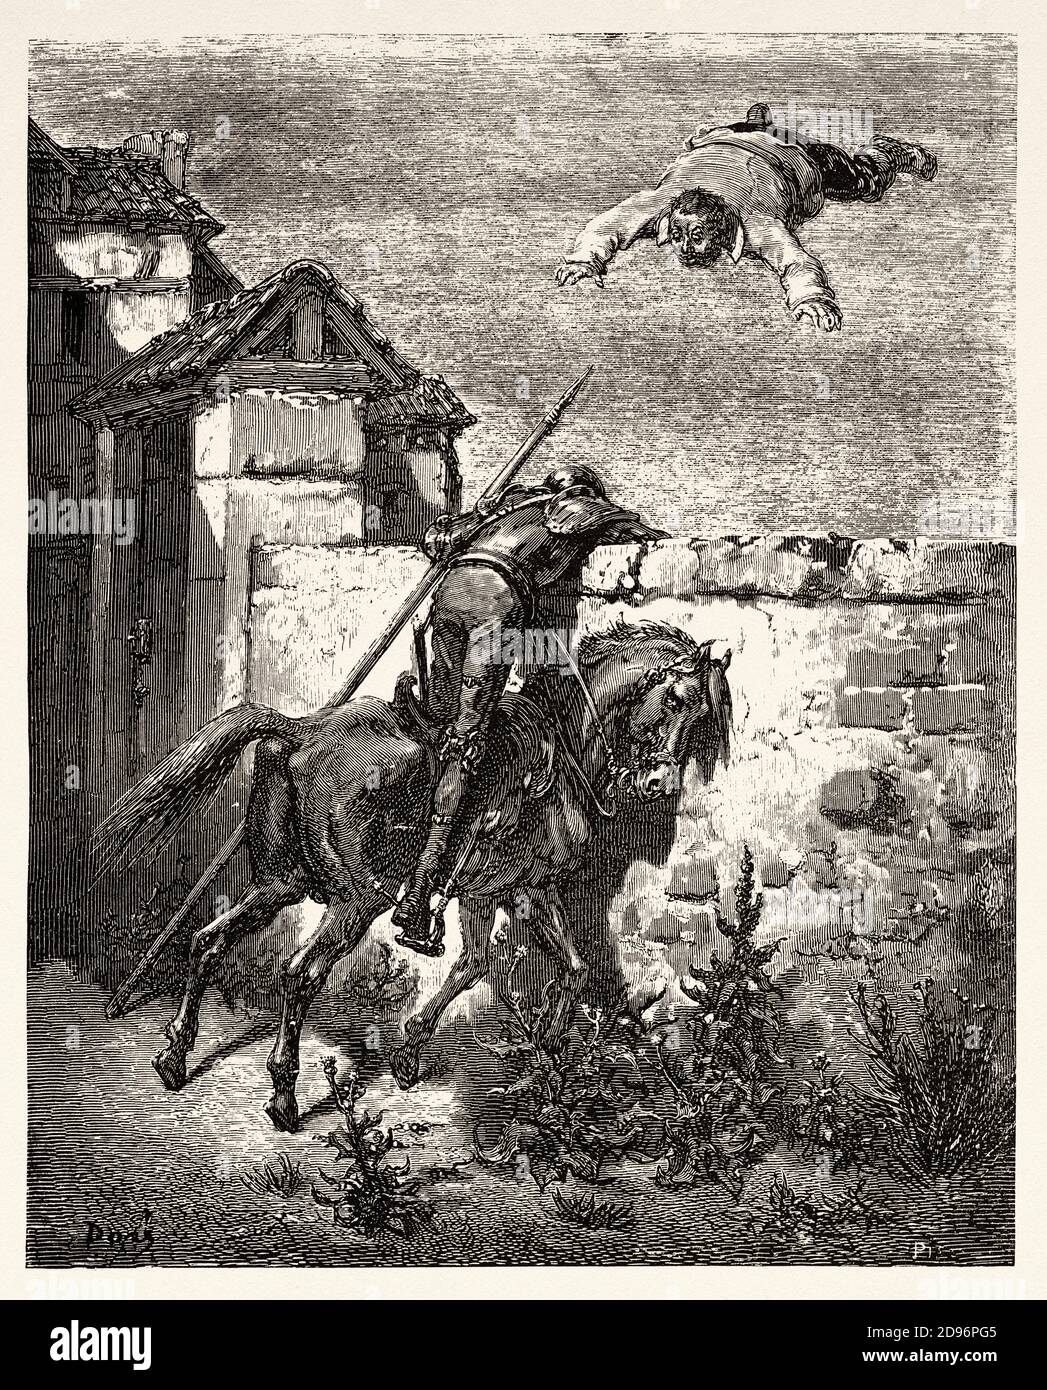 Sancho Panza thrown over the wall. Don Quixote by Miguel de Cervantes Saavedra. Old XIX century engraving illustration by Gustave Dore Stock Photo